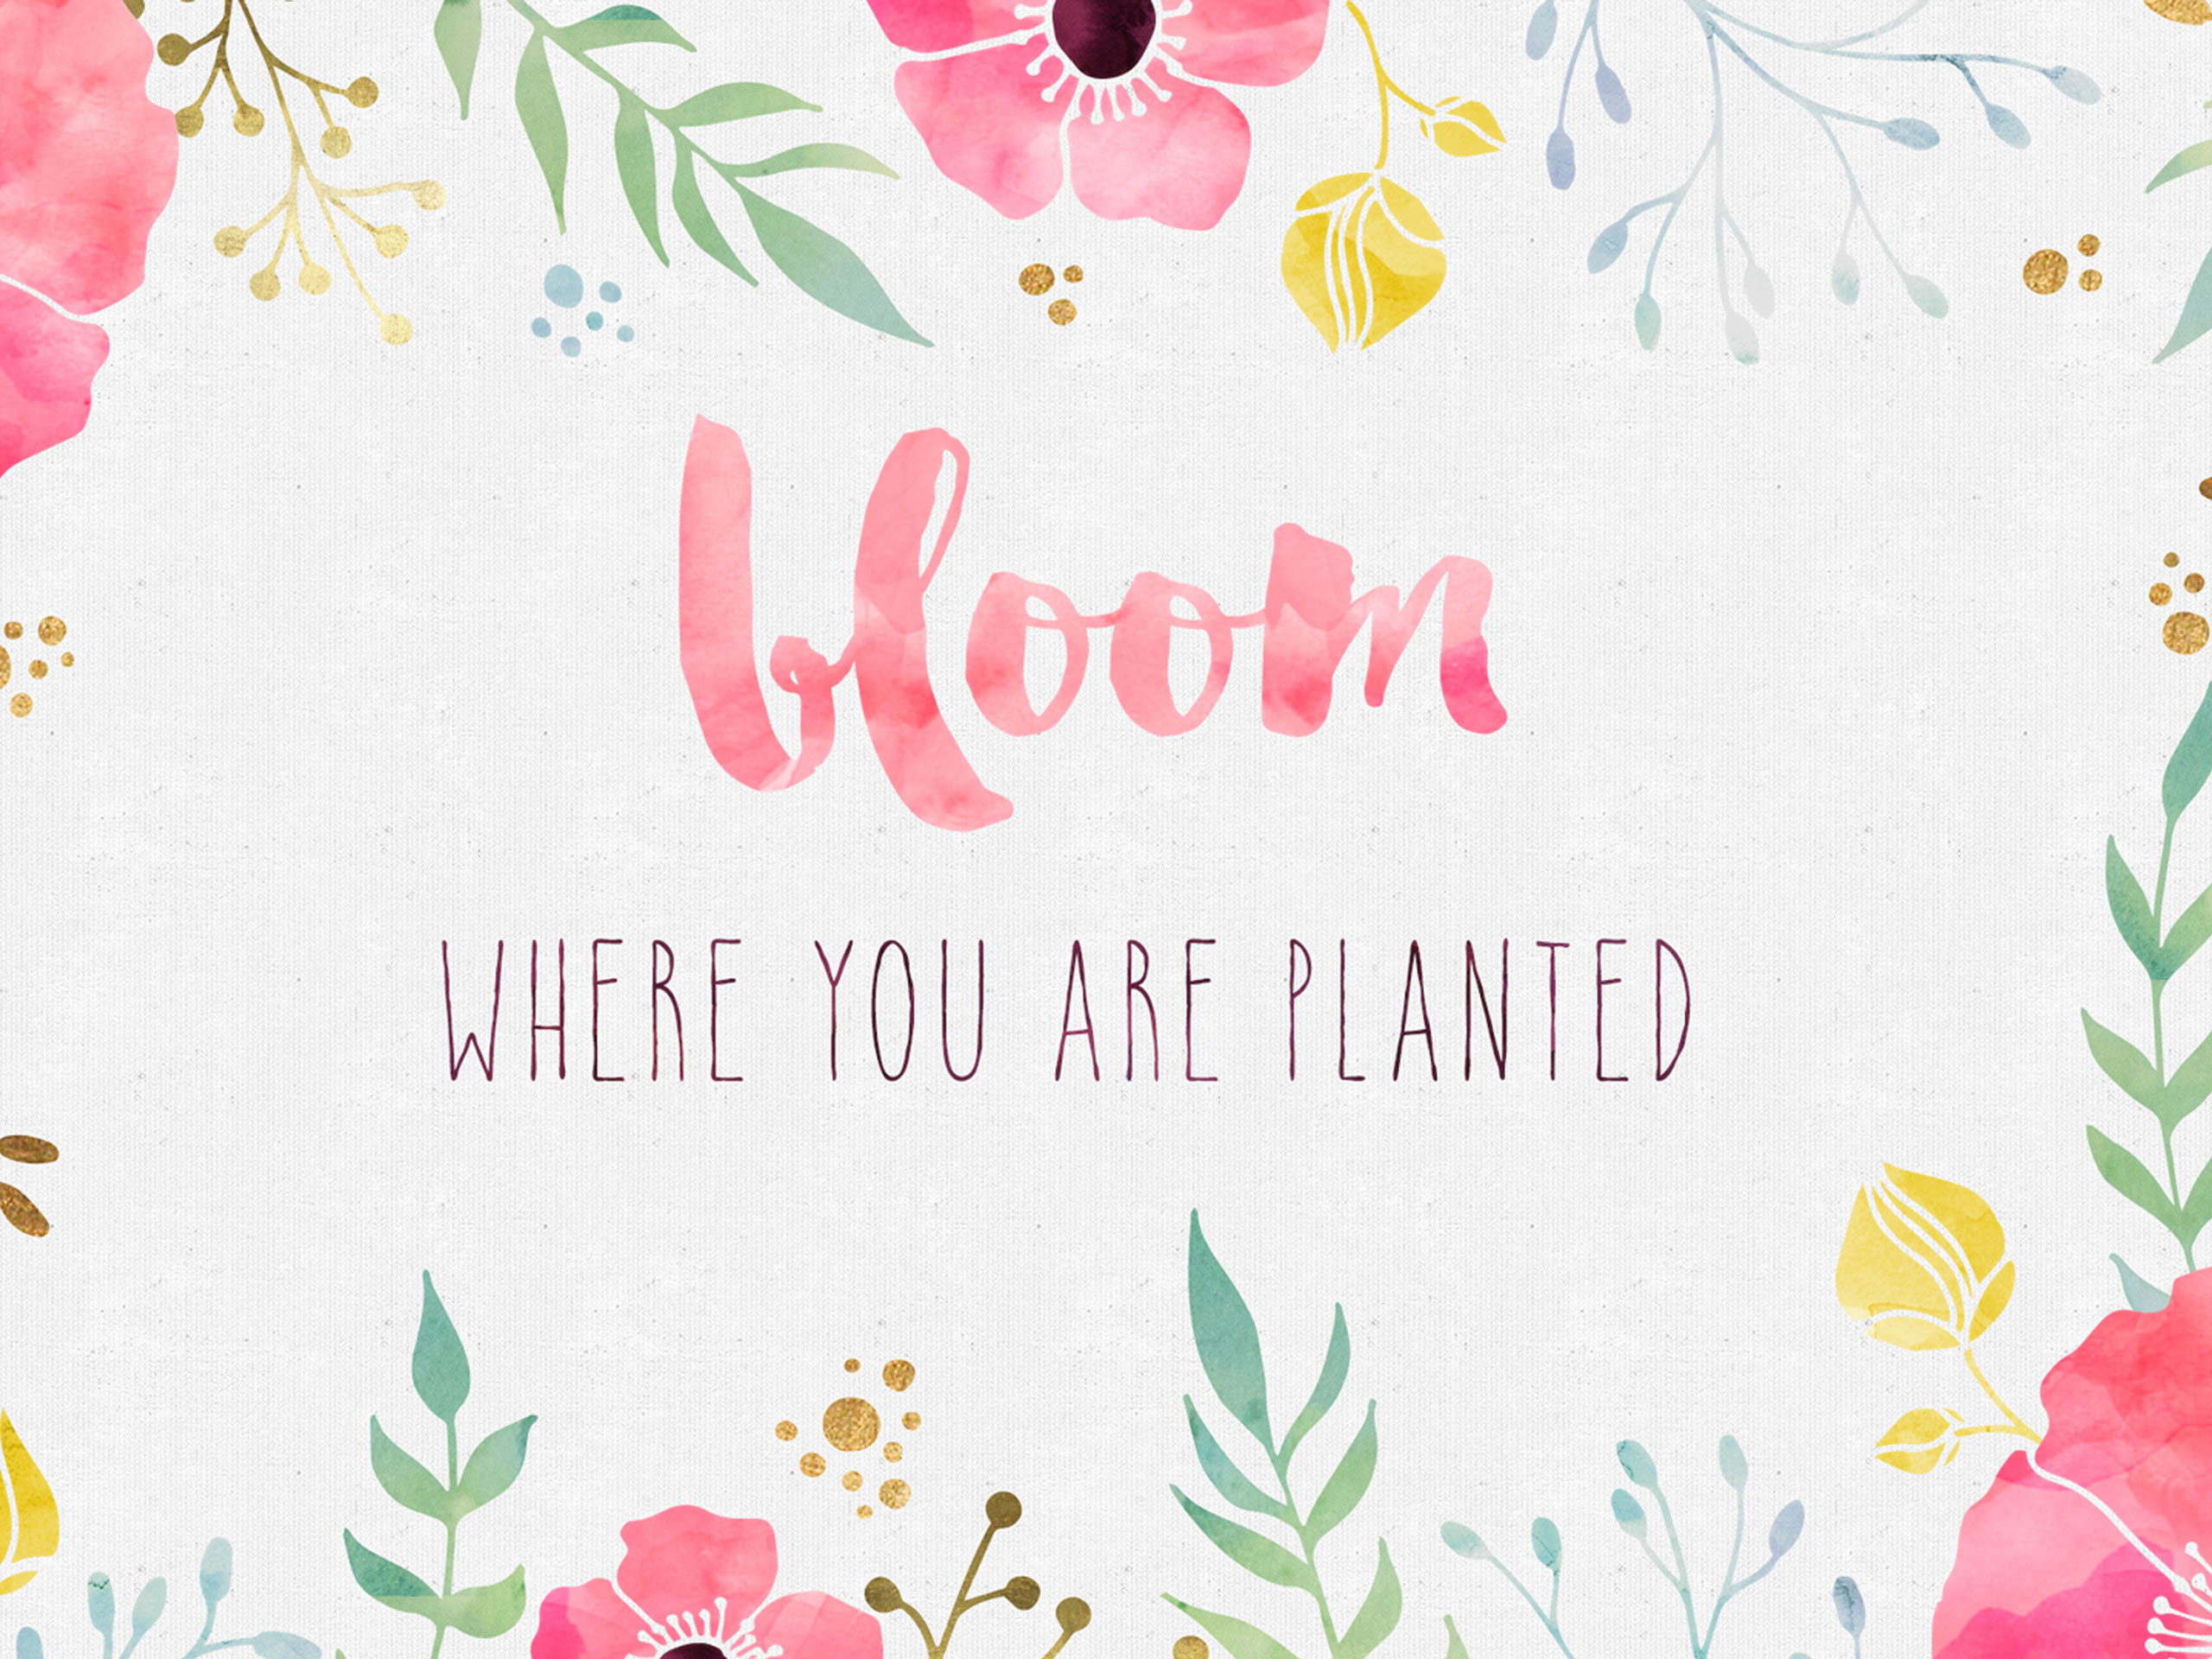 Free Desktop Wallpaper – Bloom Where you are Planted